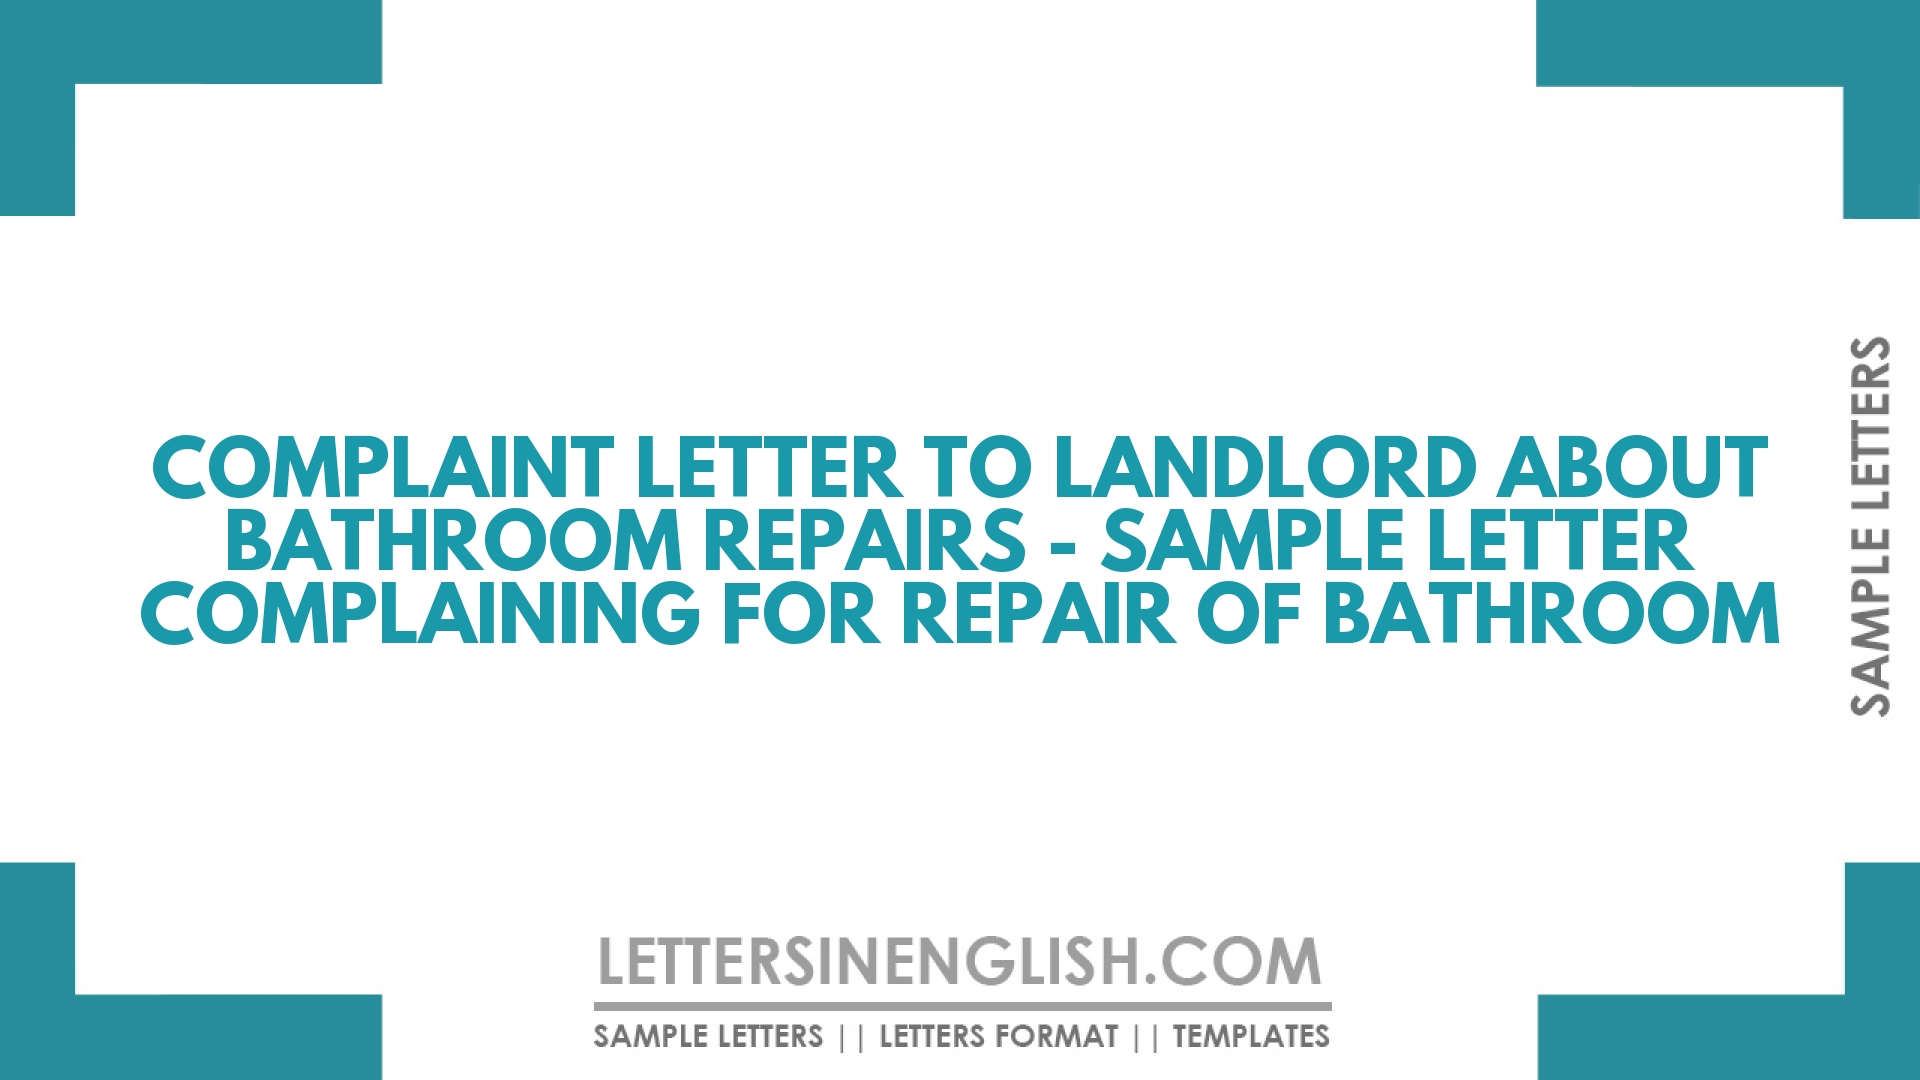 Complaint Letter to Landlord About Bathroom Repairs – Sample Letter Complaining for Repair of Bathroom